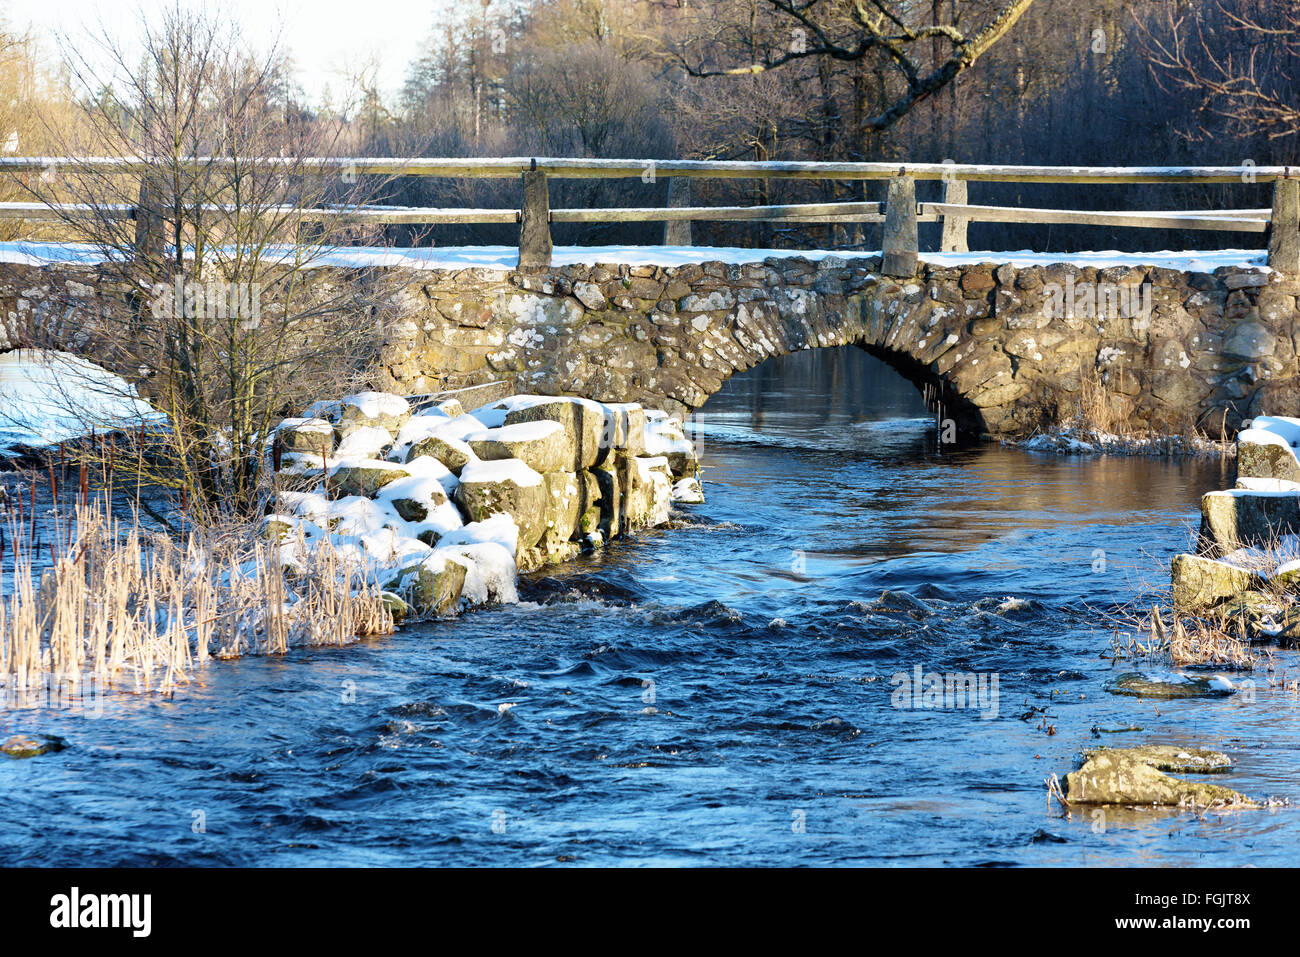 Detail of Blidingsholm stone arch bridge that crosses the river Morrumsan. Thin layer of snow cover the ground and stones. Small Stock Photo